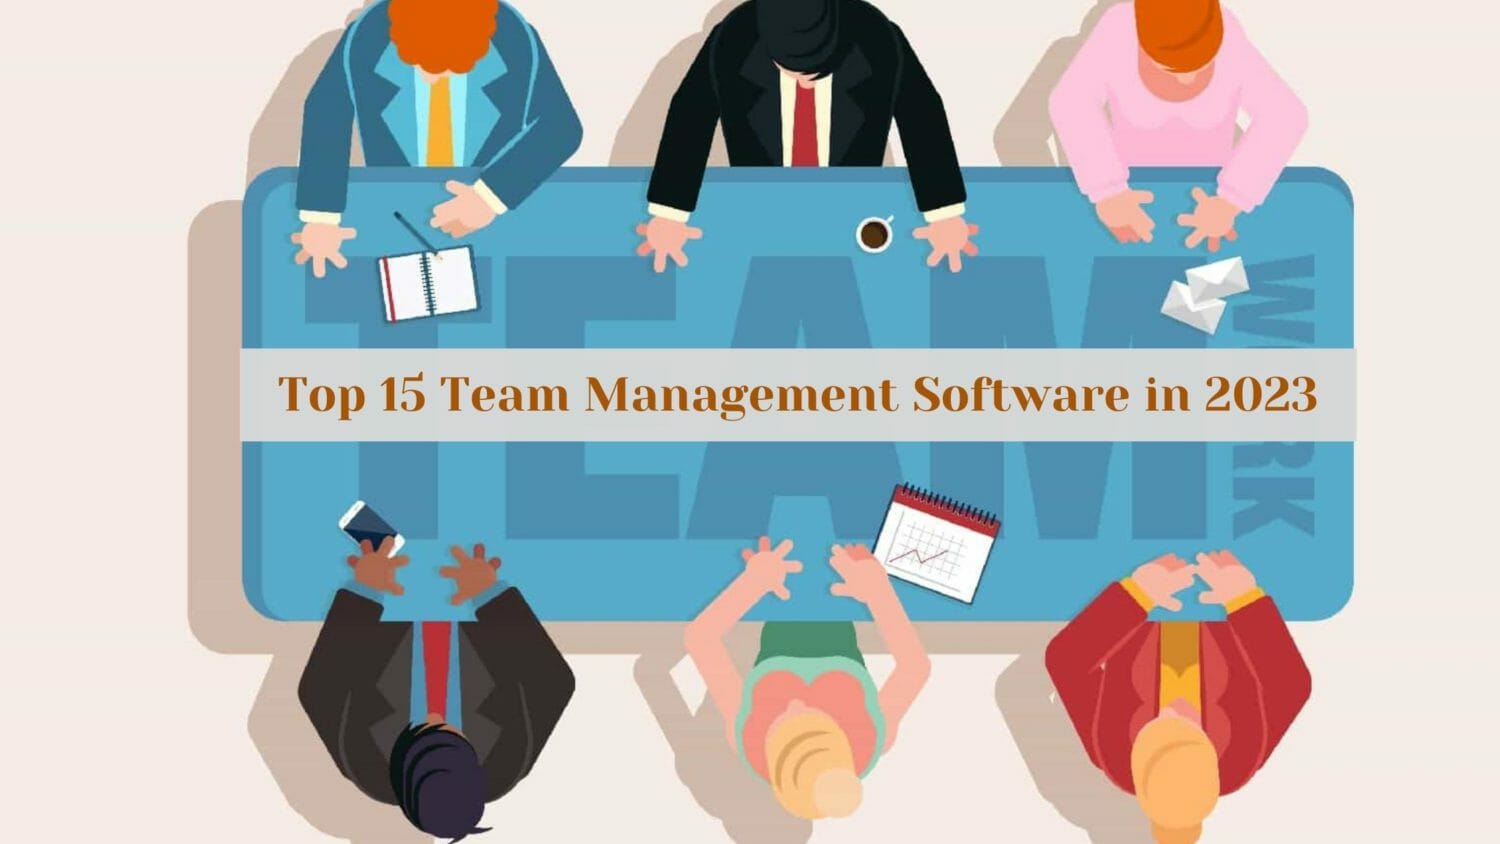 Top 15 Team Management Software In 2023